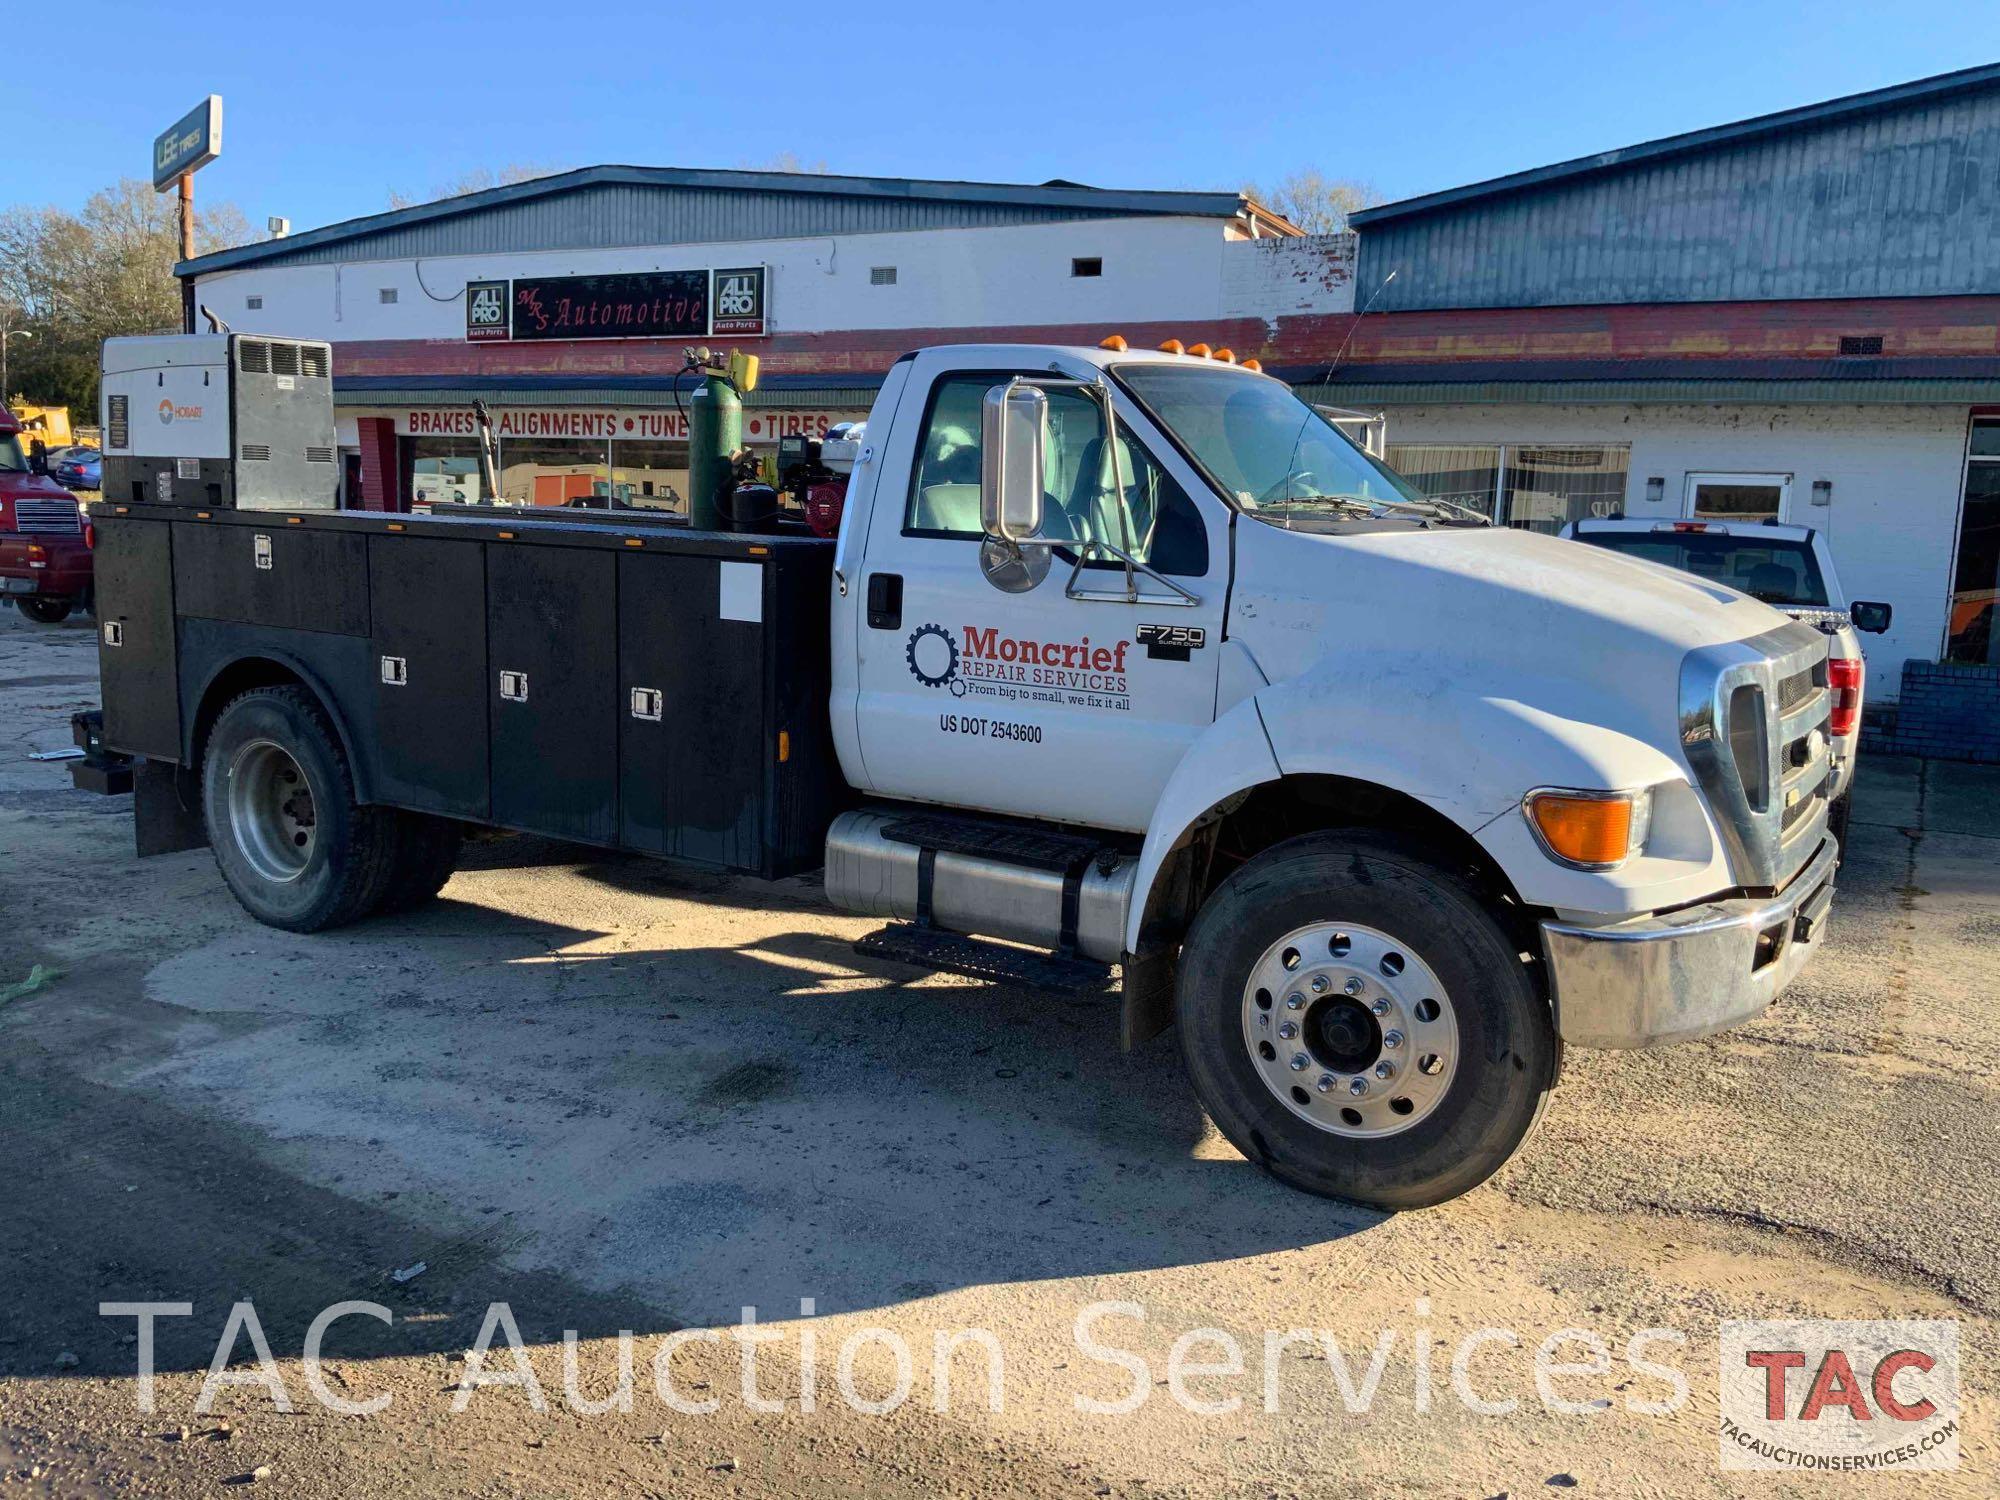 2007 Ford F750 Service Truck